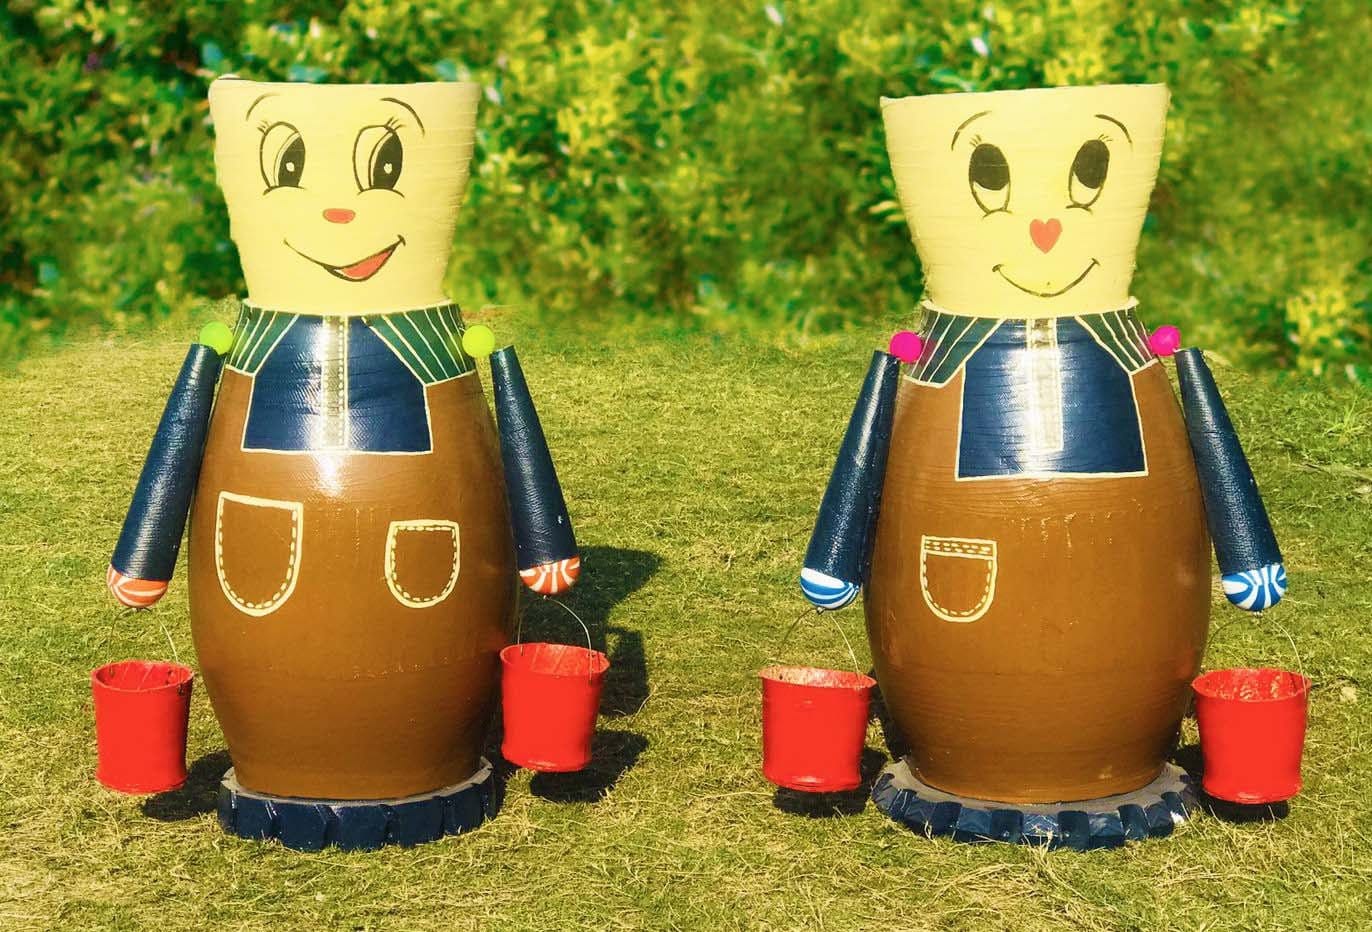 De'Dzines Doll Planters (Made of Rubber)